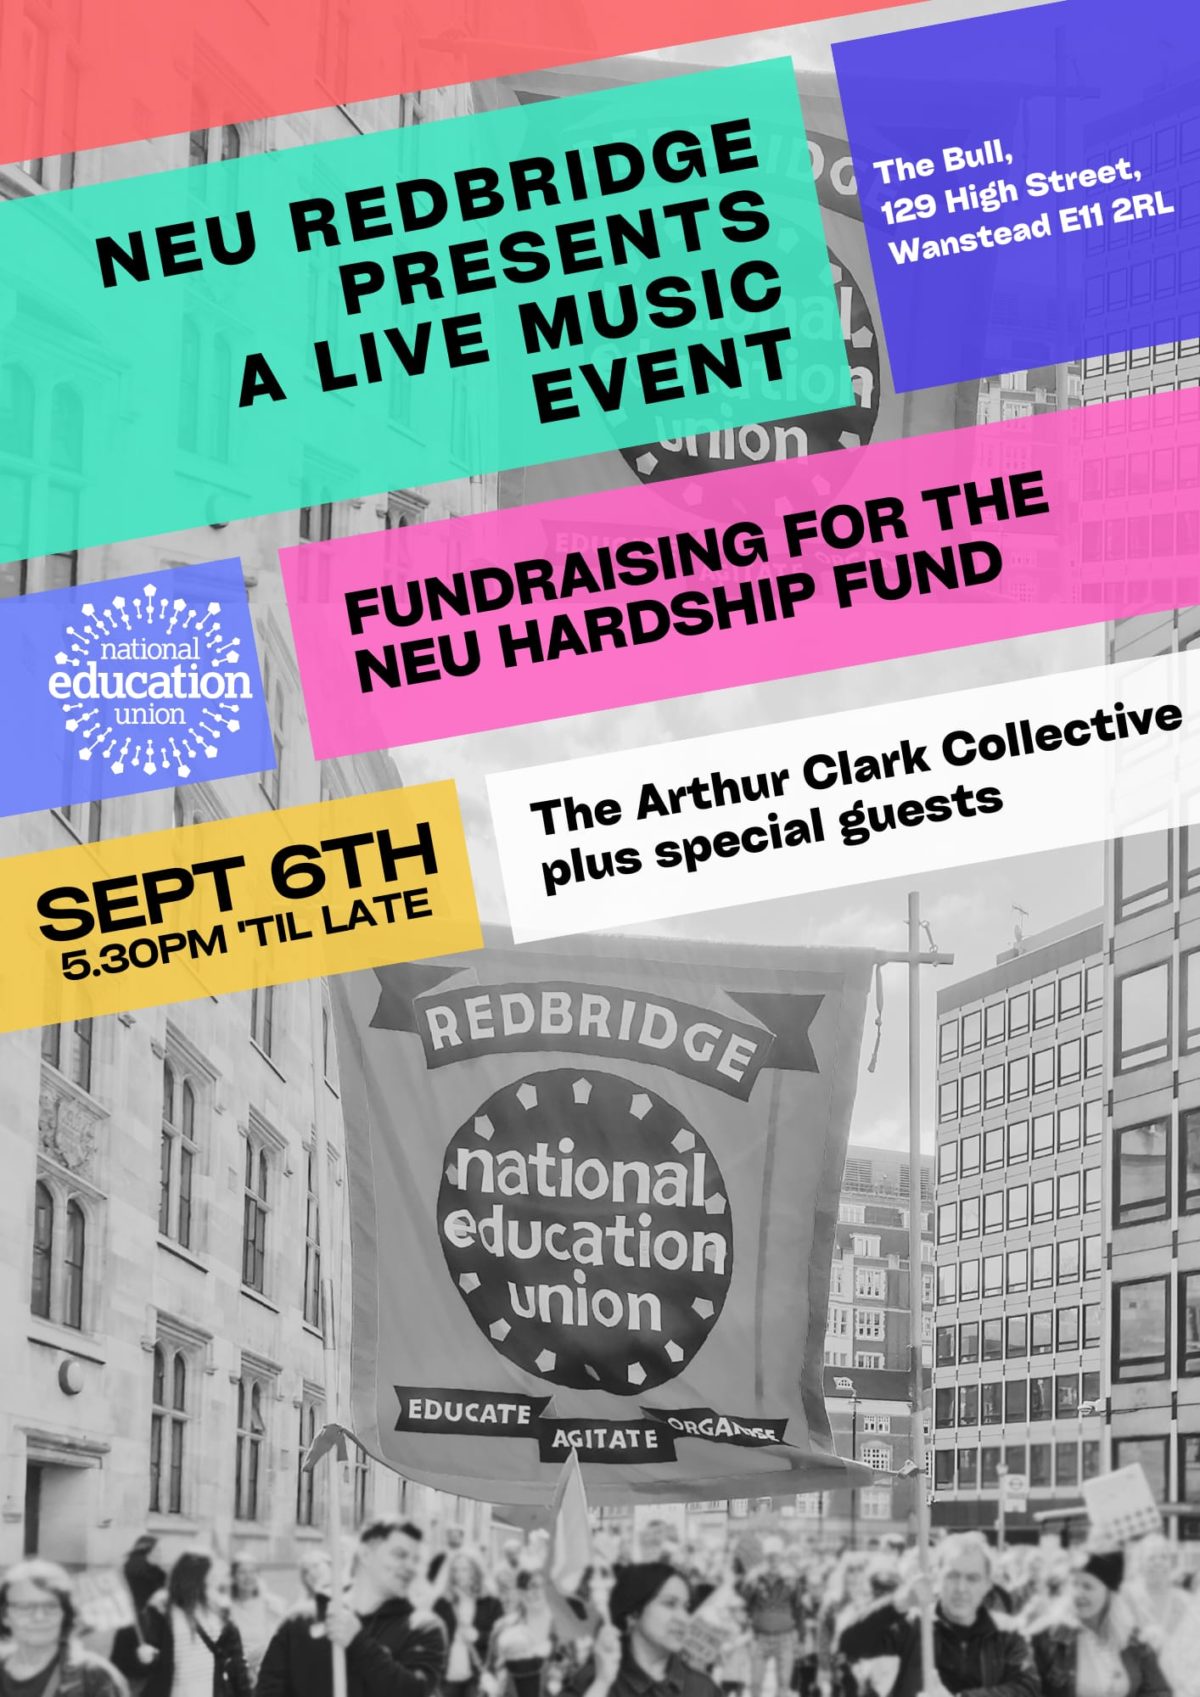 Live music fundraiser: The Arthur Clark Collective and guests